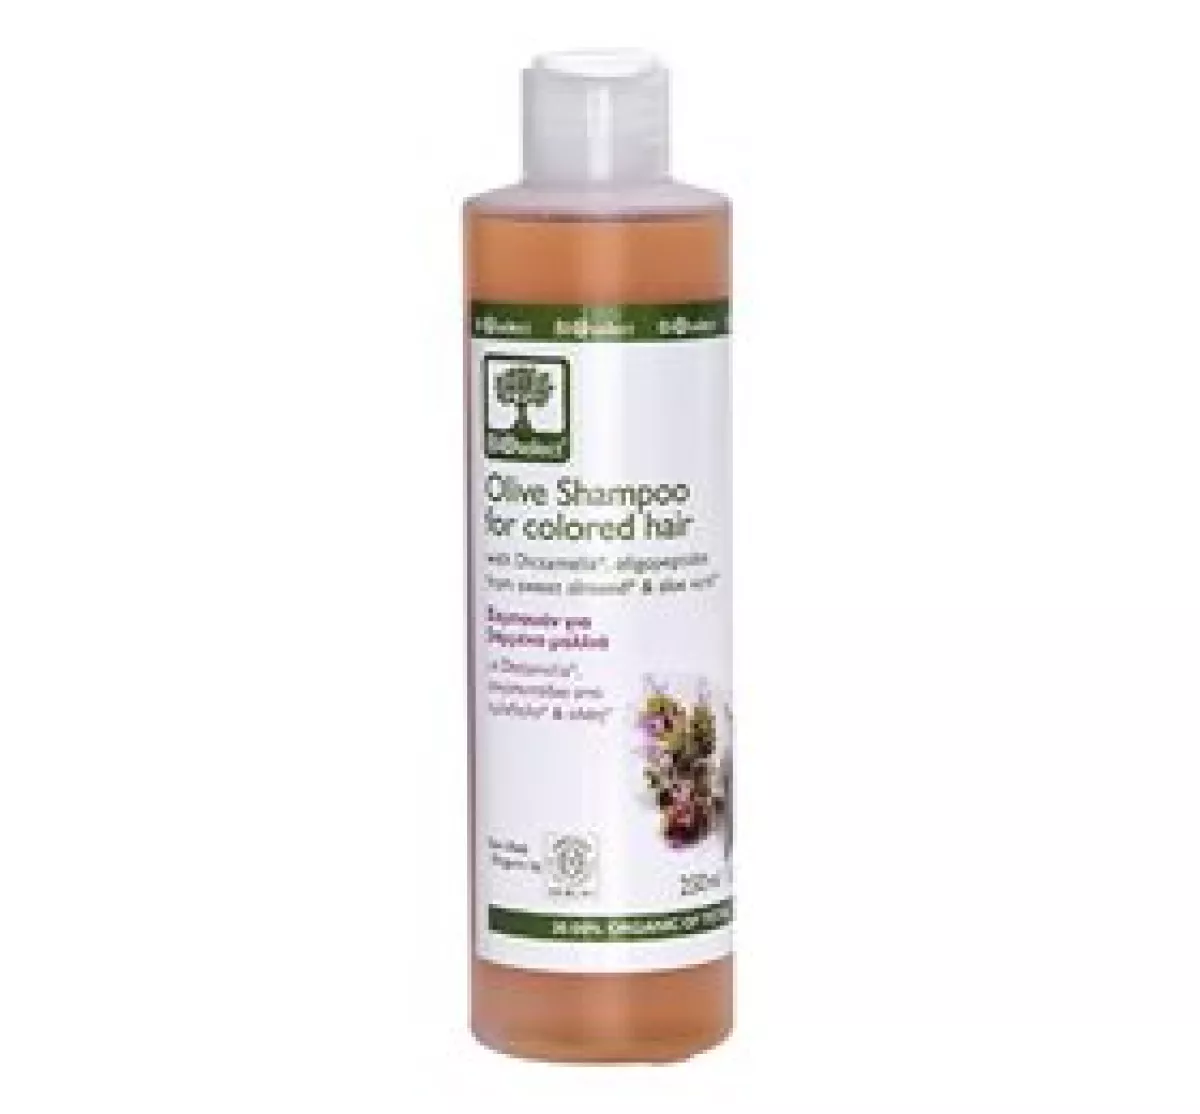 #1 - Olive Shampoo For Colored Hair